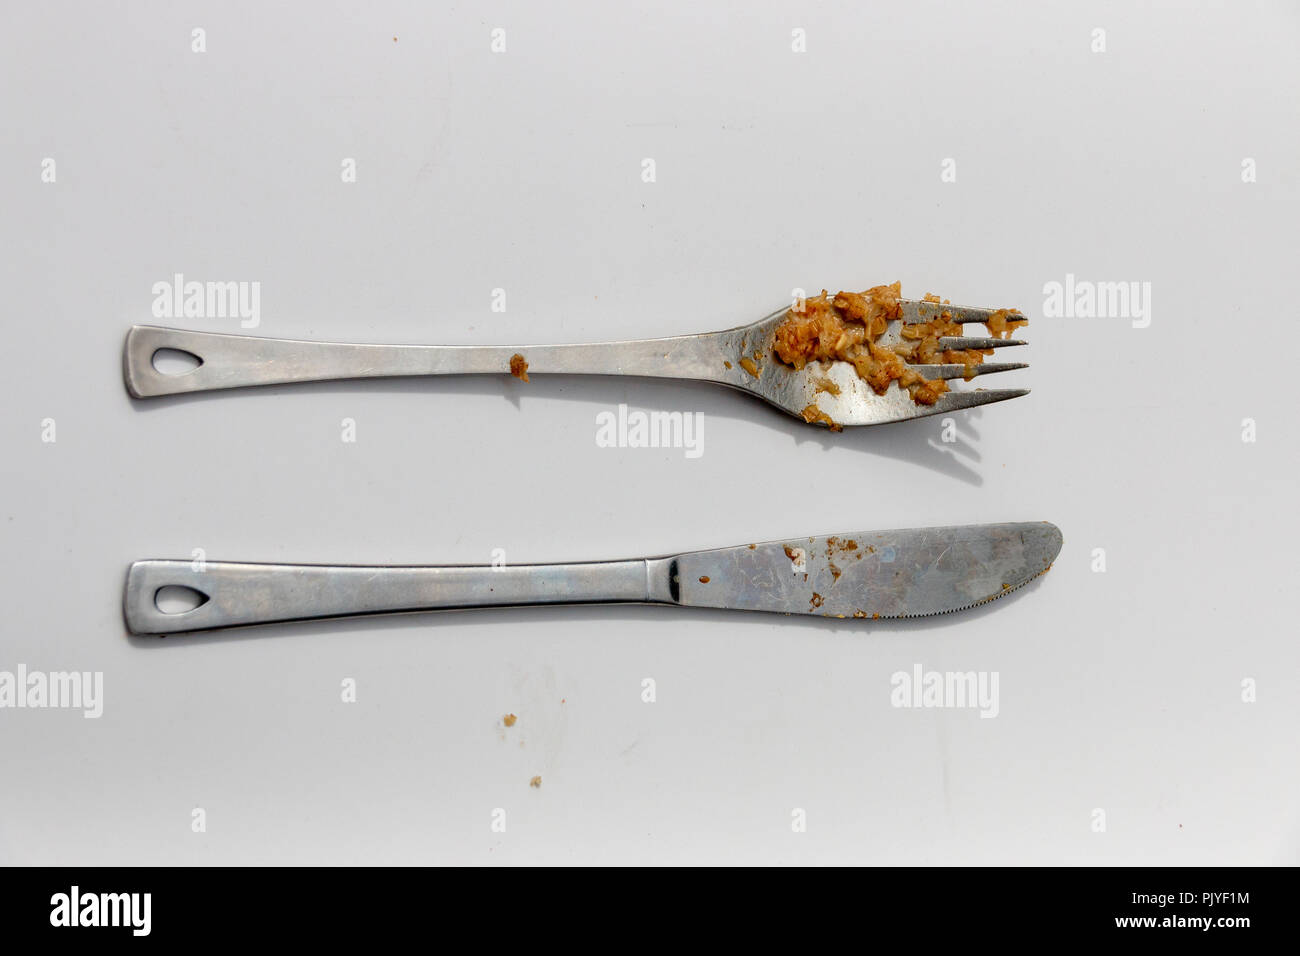 A close up view of adirty silver knife and fork next to each other on a isolated white background Stock Photo